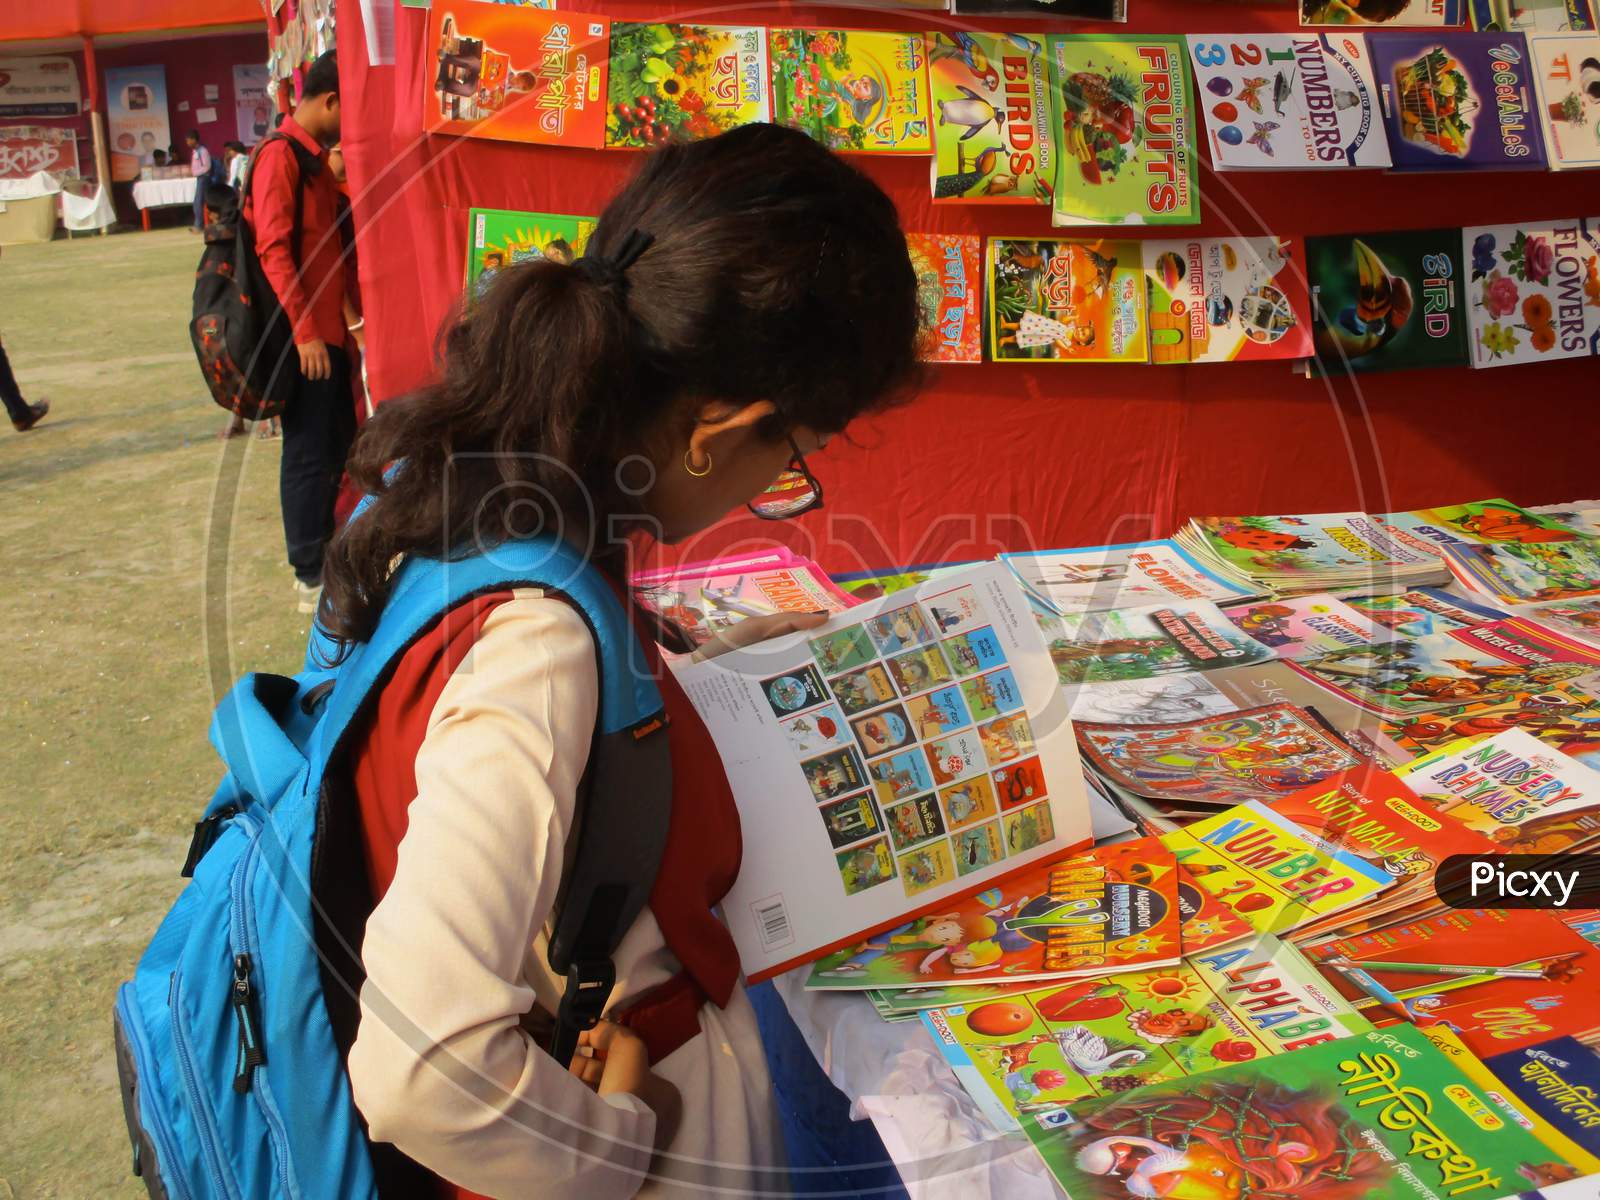 West Bengal , India March 02, 2020 : Indian Book Fair, There Are Many Bengali Books In The Fair Shop And The Store Keeper Placed Those Books With An Interesting View .